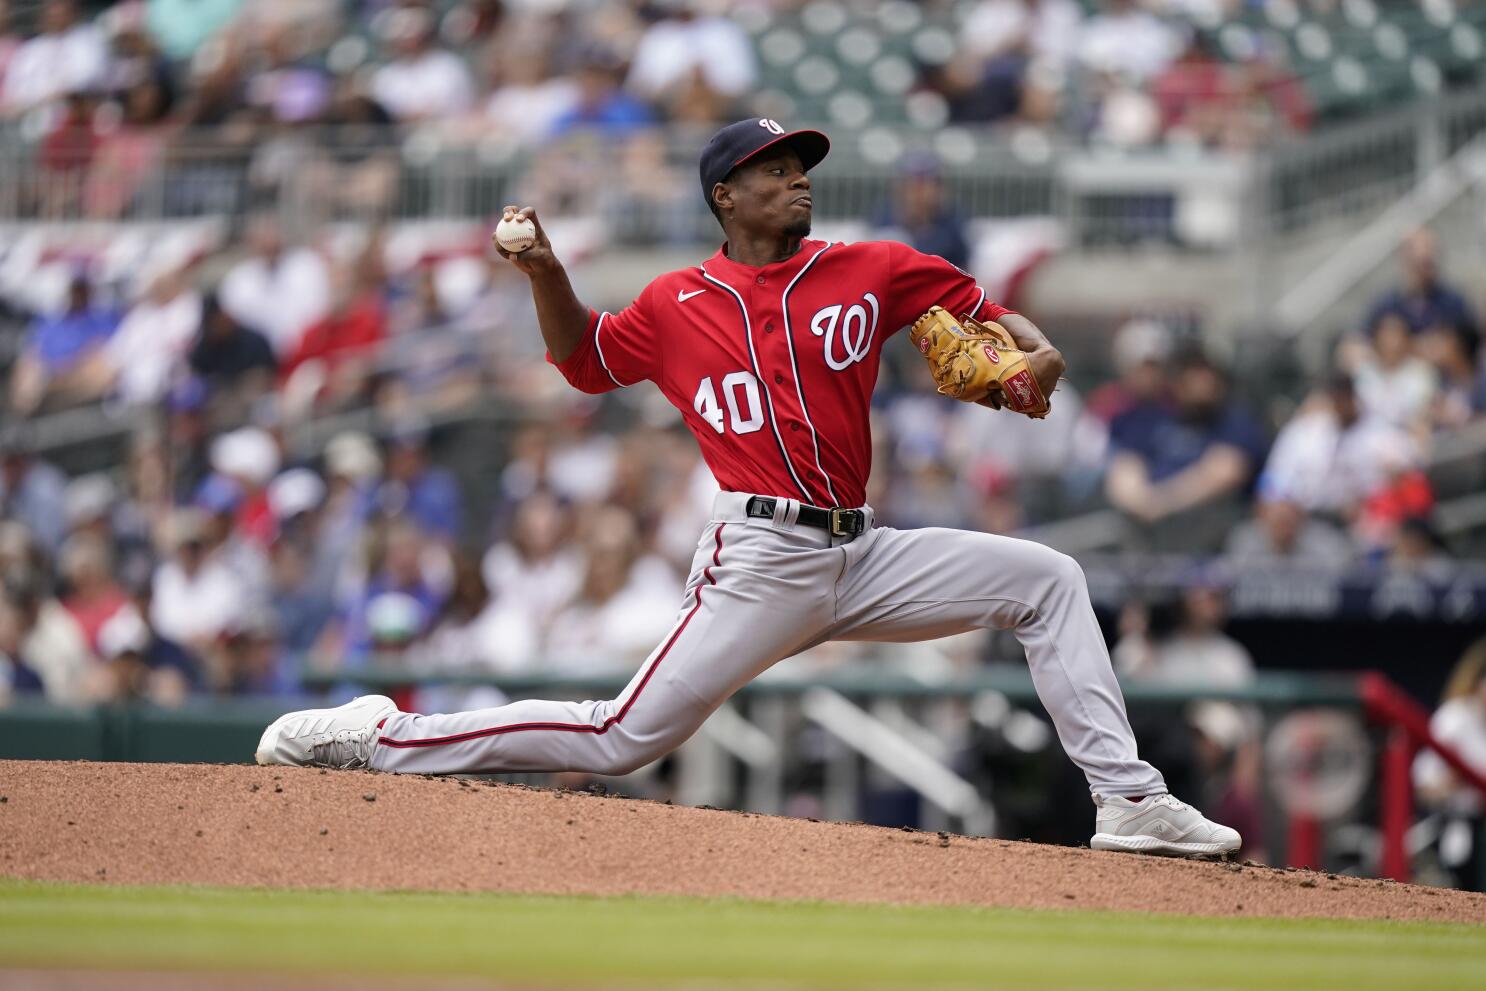 Gray allows only 1 hit as Nationals beat Fried, Braves 3-1 - The